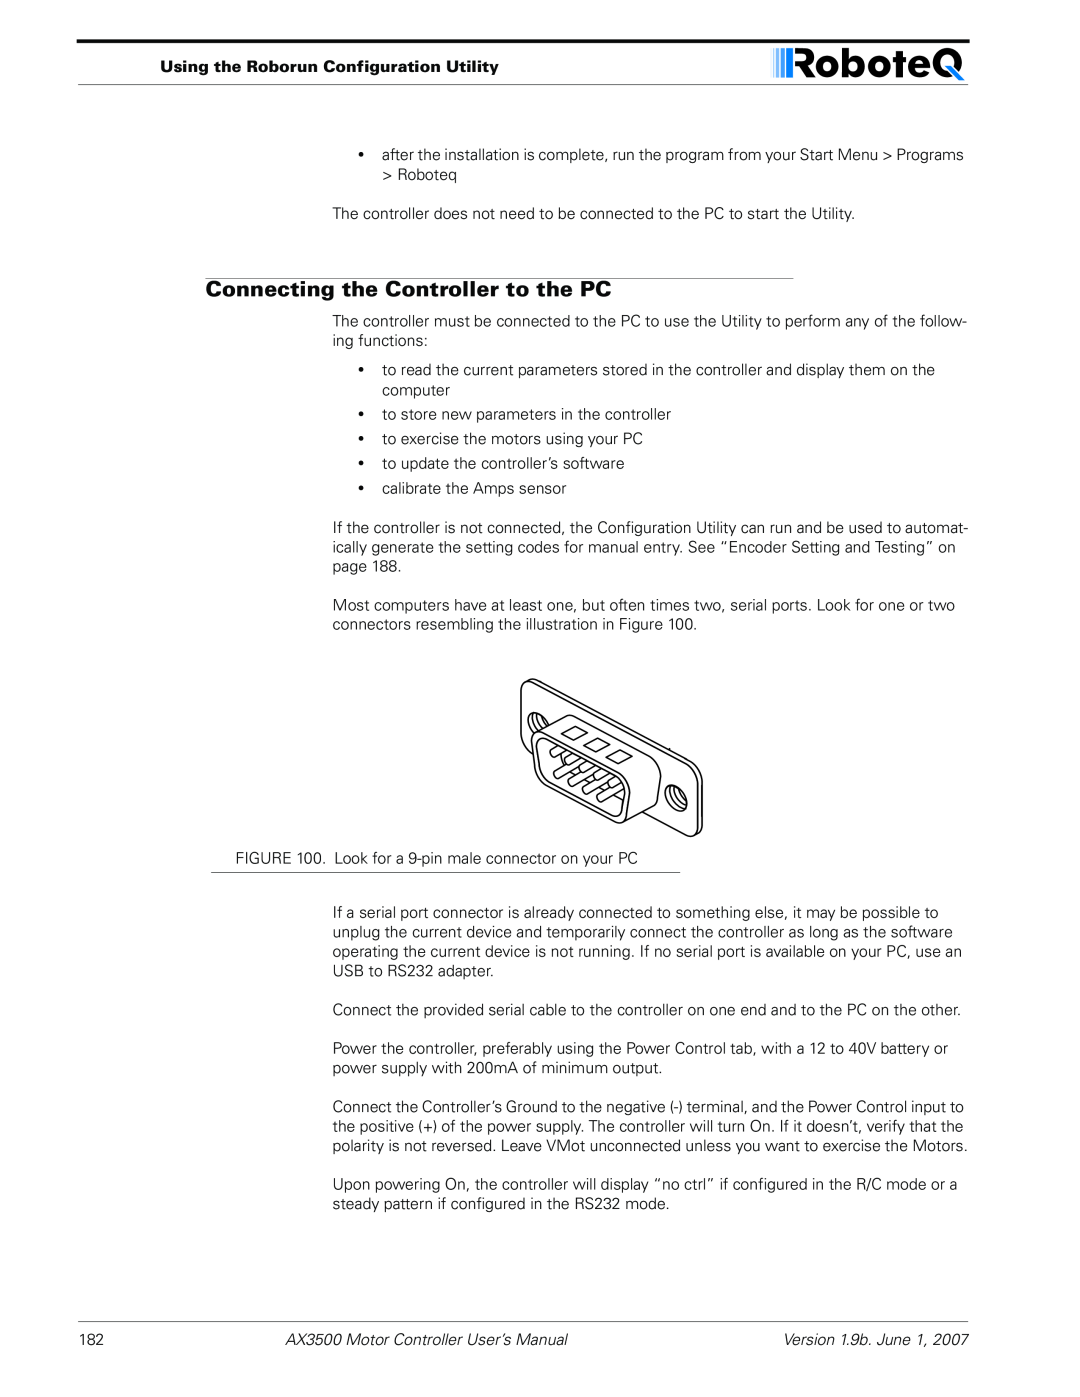 RoboteQ AX3500 user manual Connecting the Controller to the PC, Using the Roborun Configuration Utility 